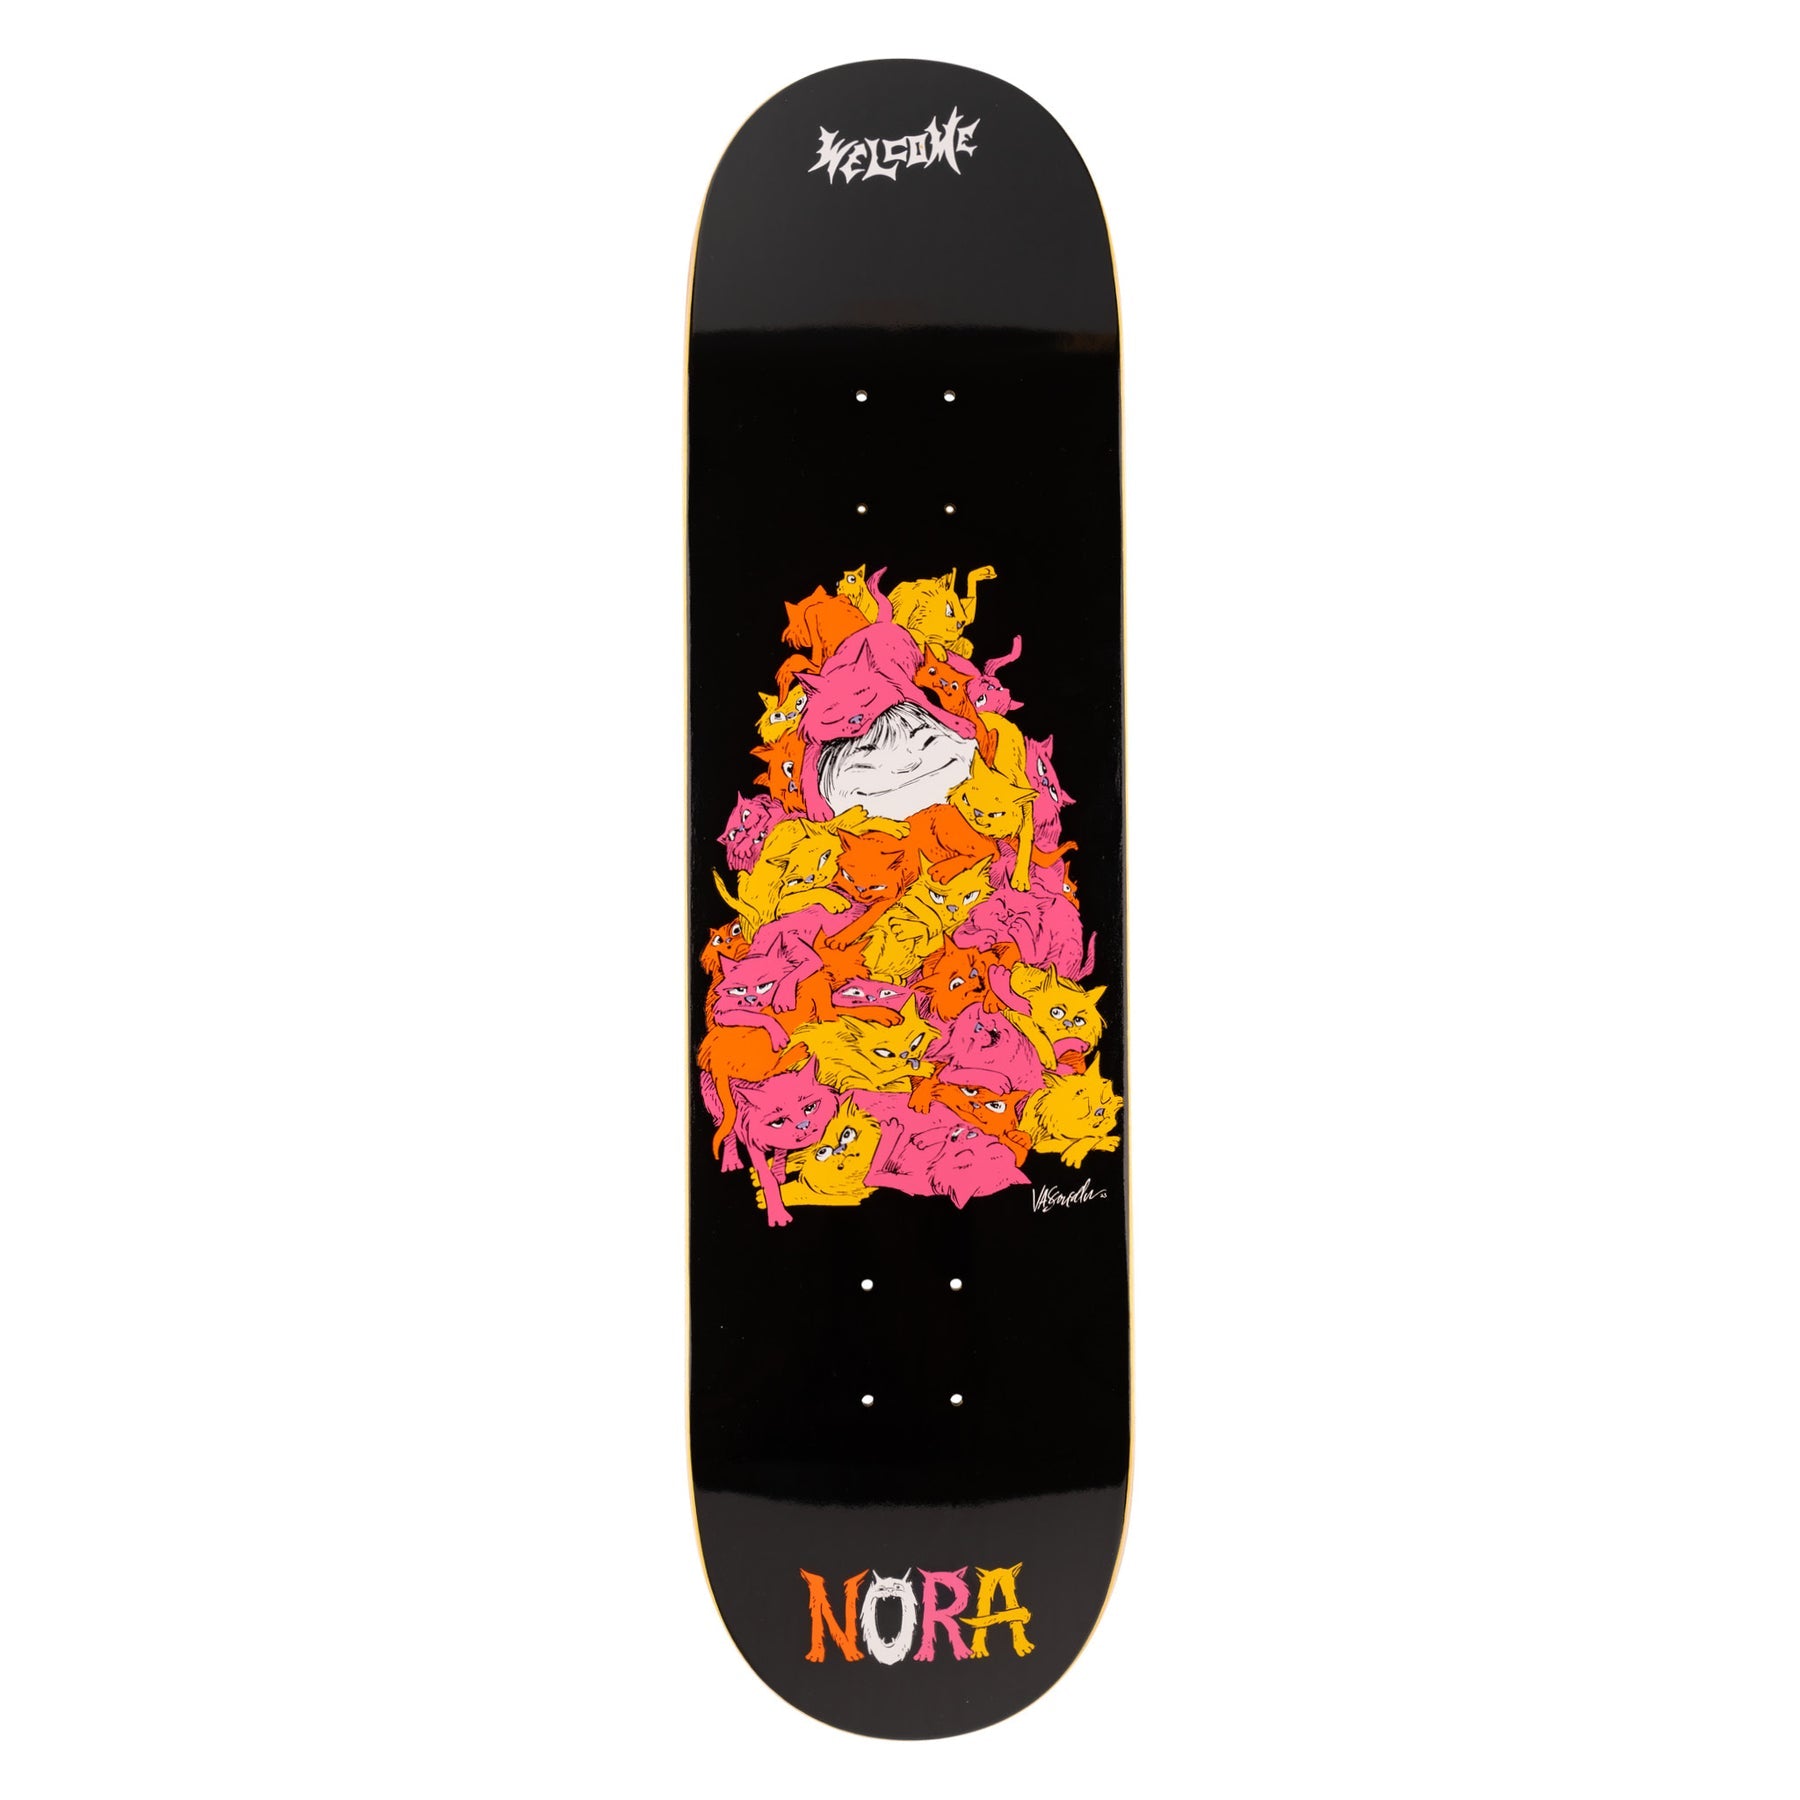 HUF X STREET FIGHTER DECK - PLAYER SELECT (8.25